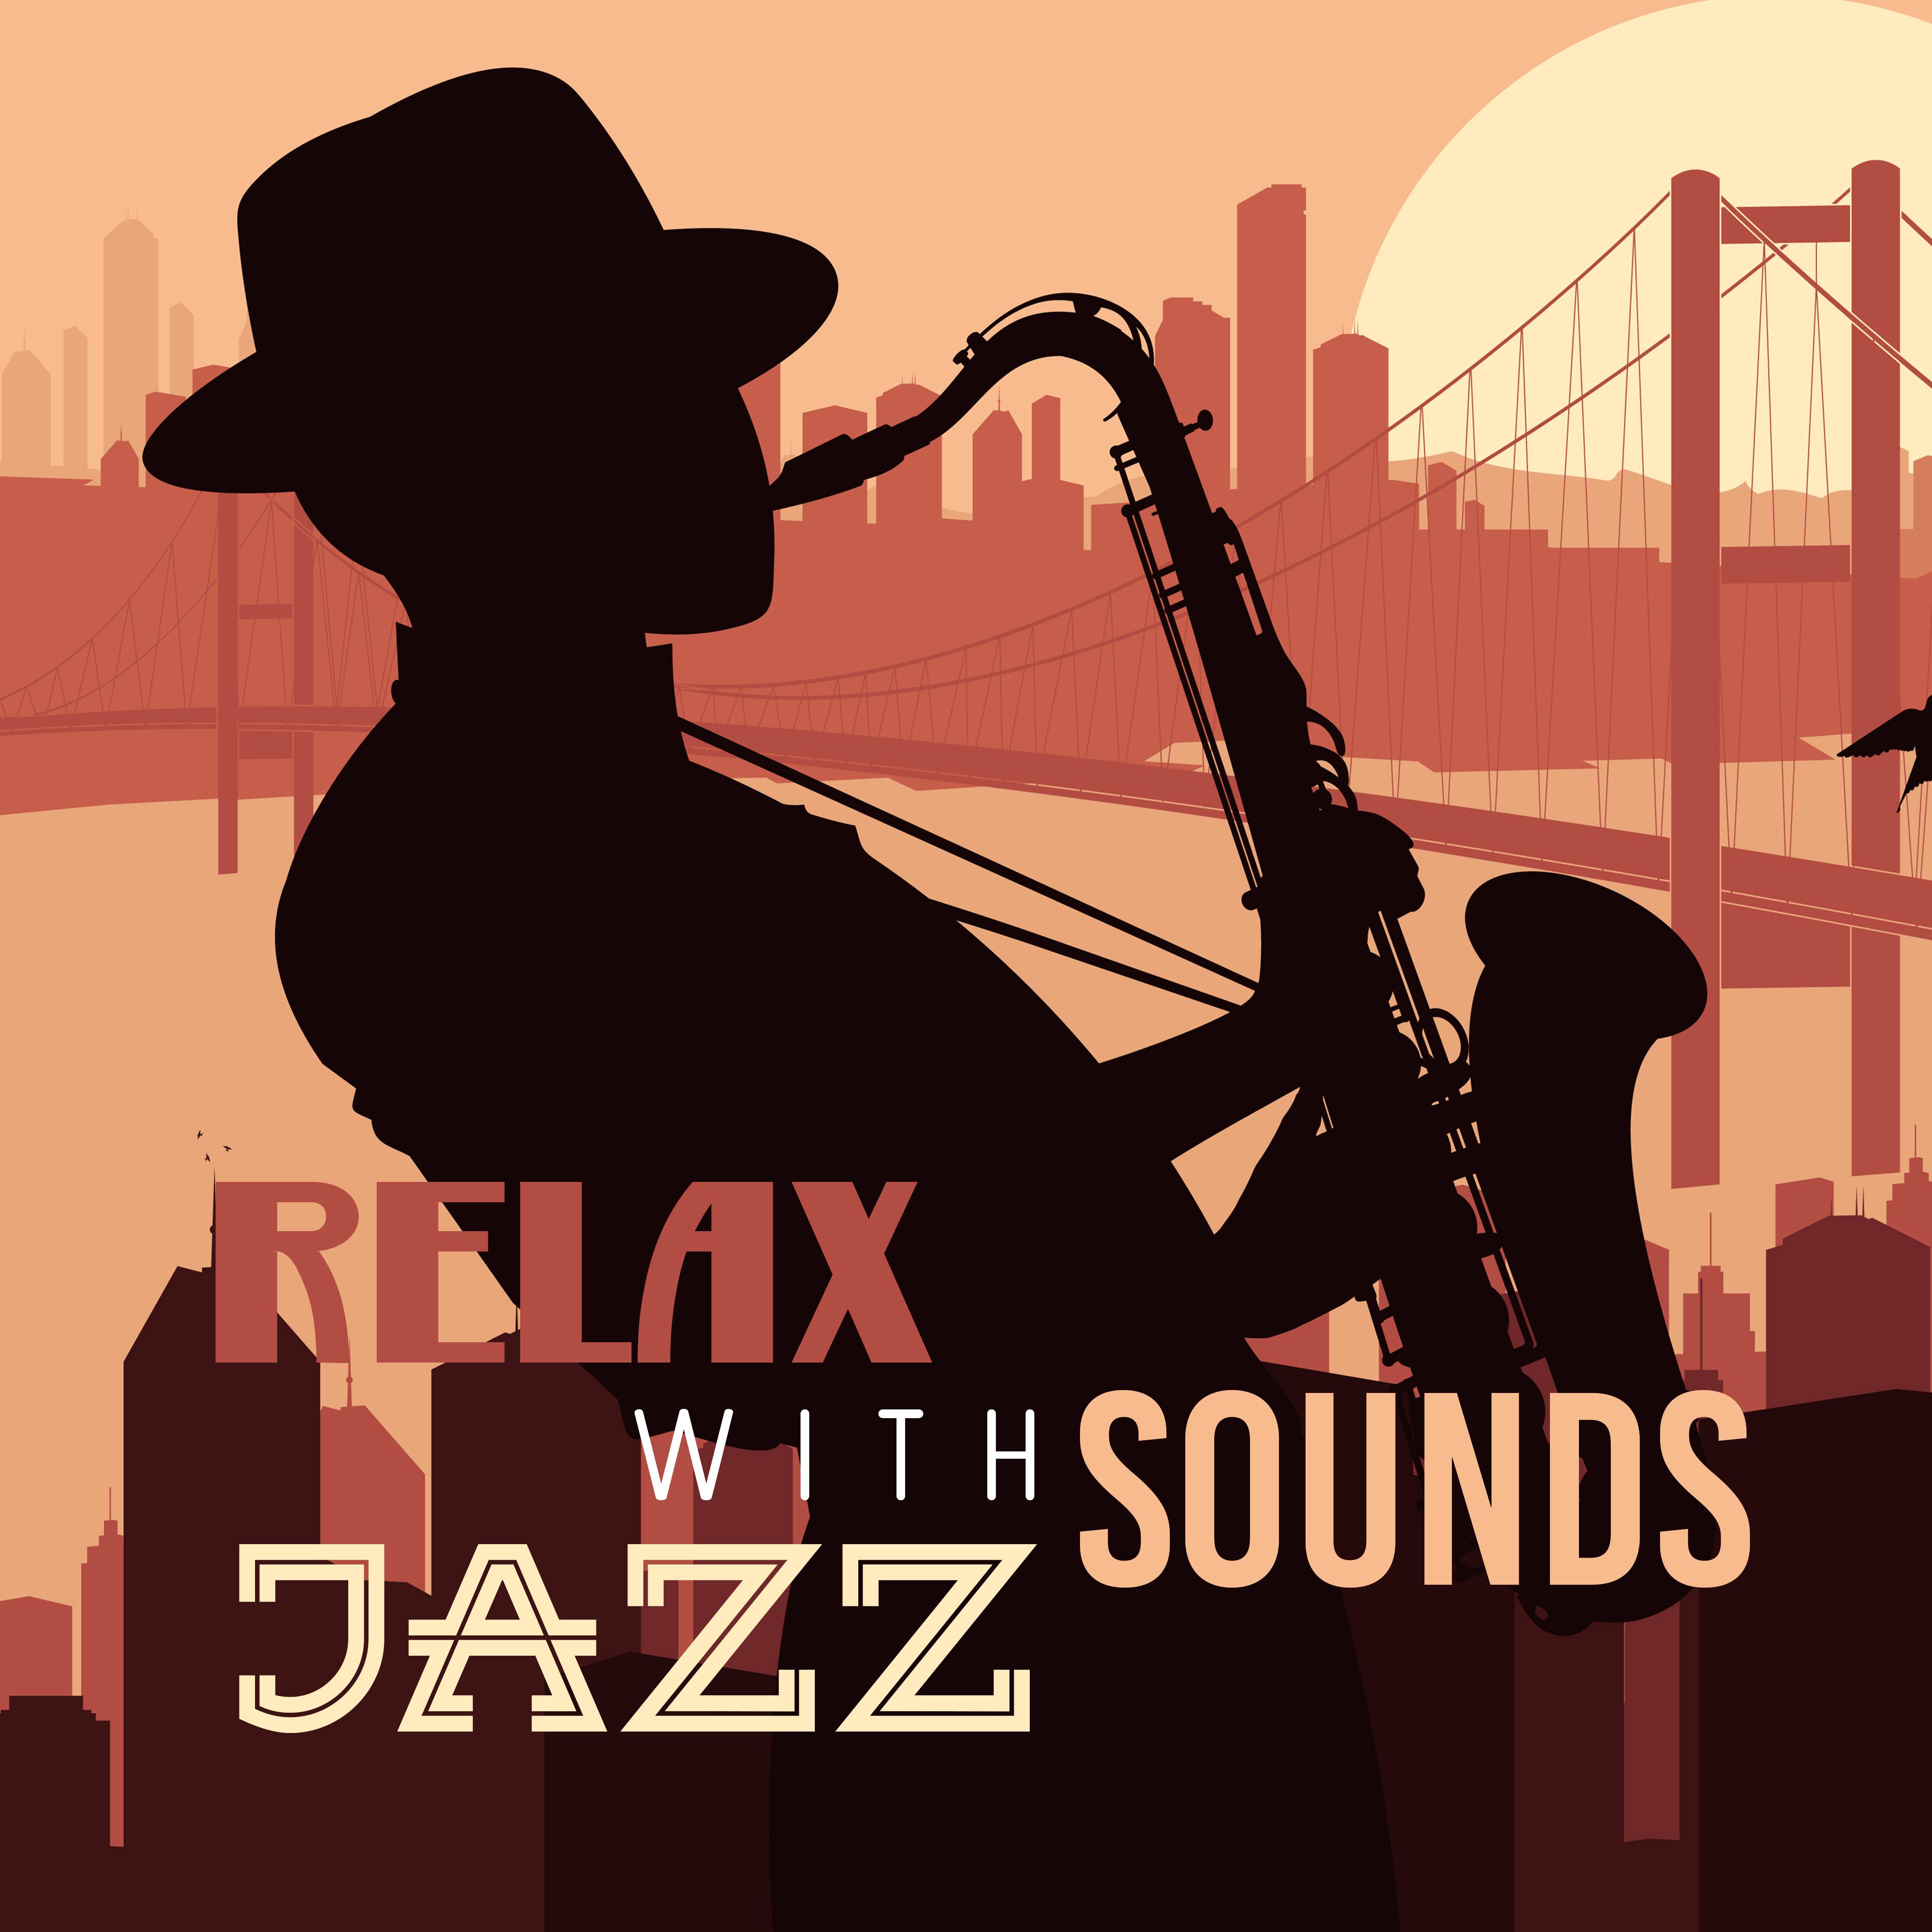 Relax with Jazz Sounds